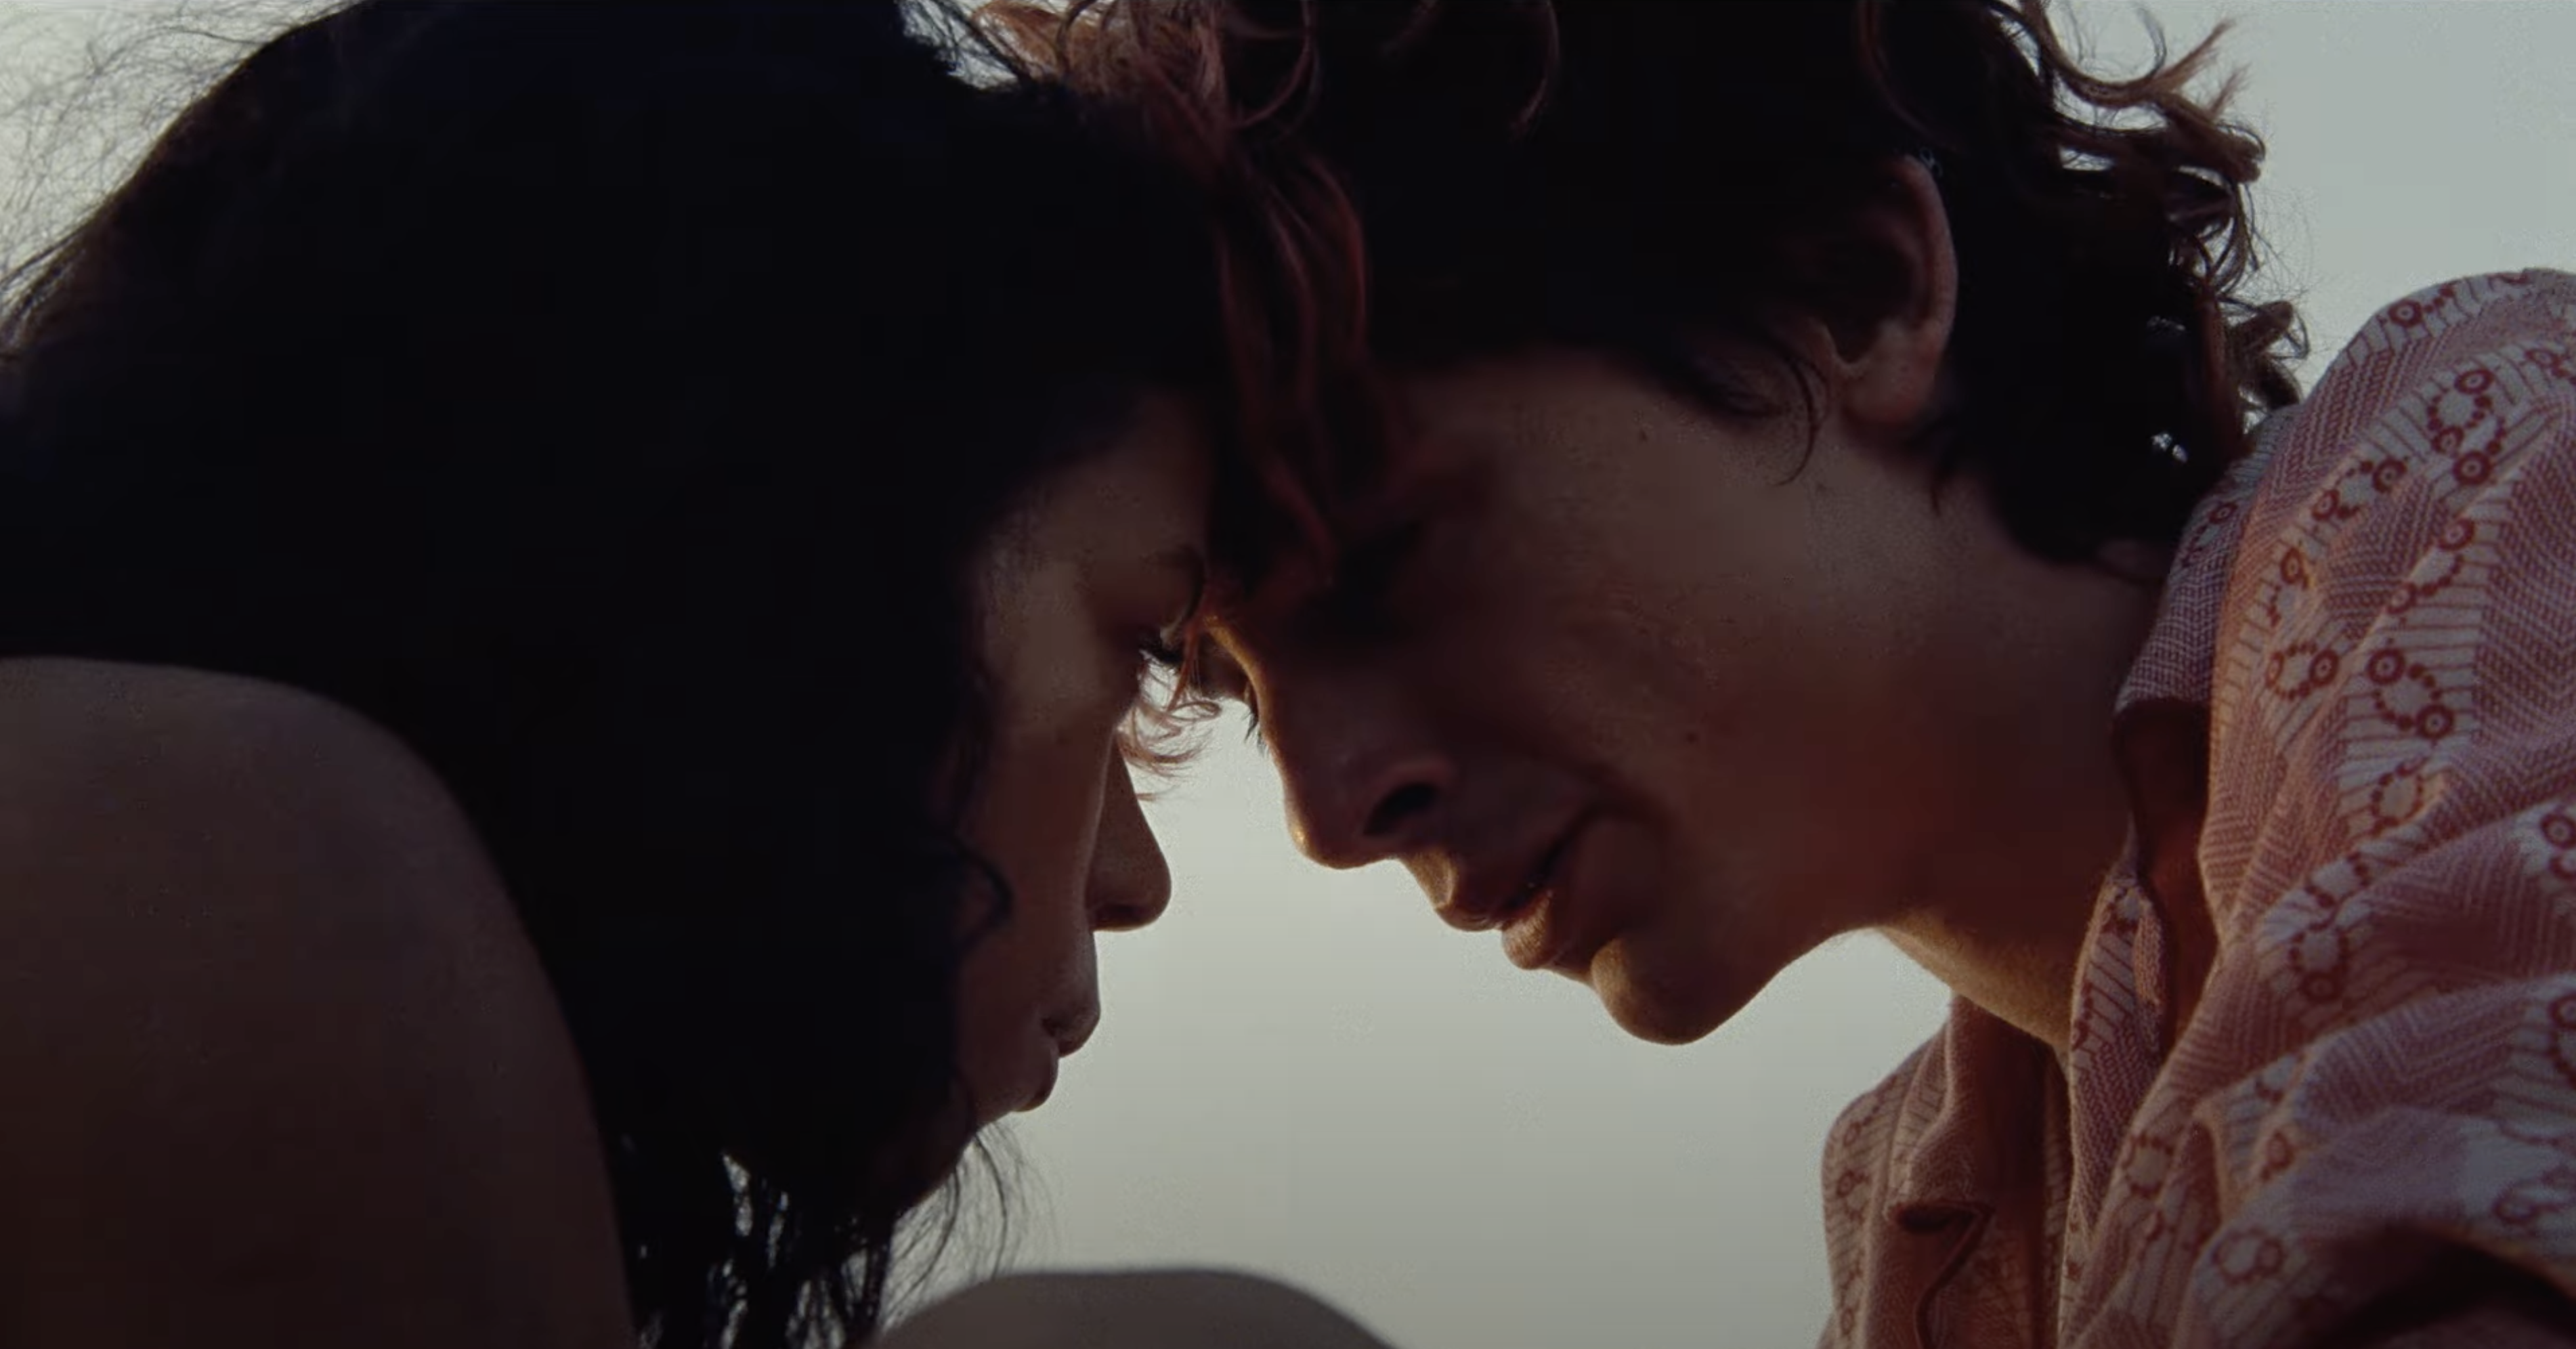 BONES AND ALL Trailer: Timothée Chalamet & Taylor Russell Are Cannibals In Love in Luca Guadagnino’s Latest